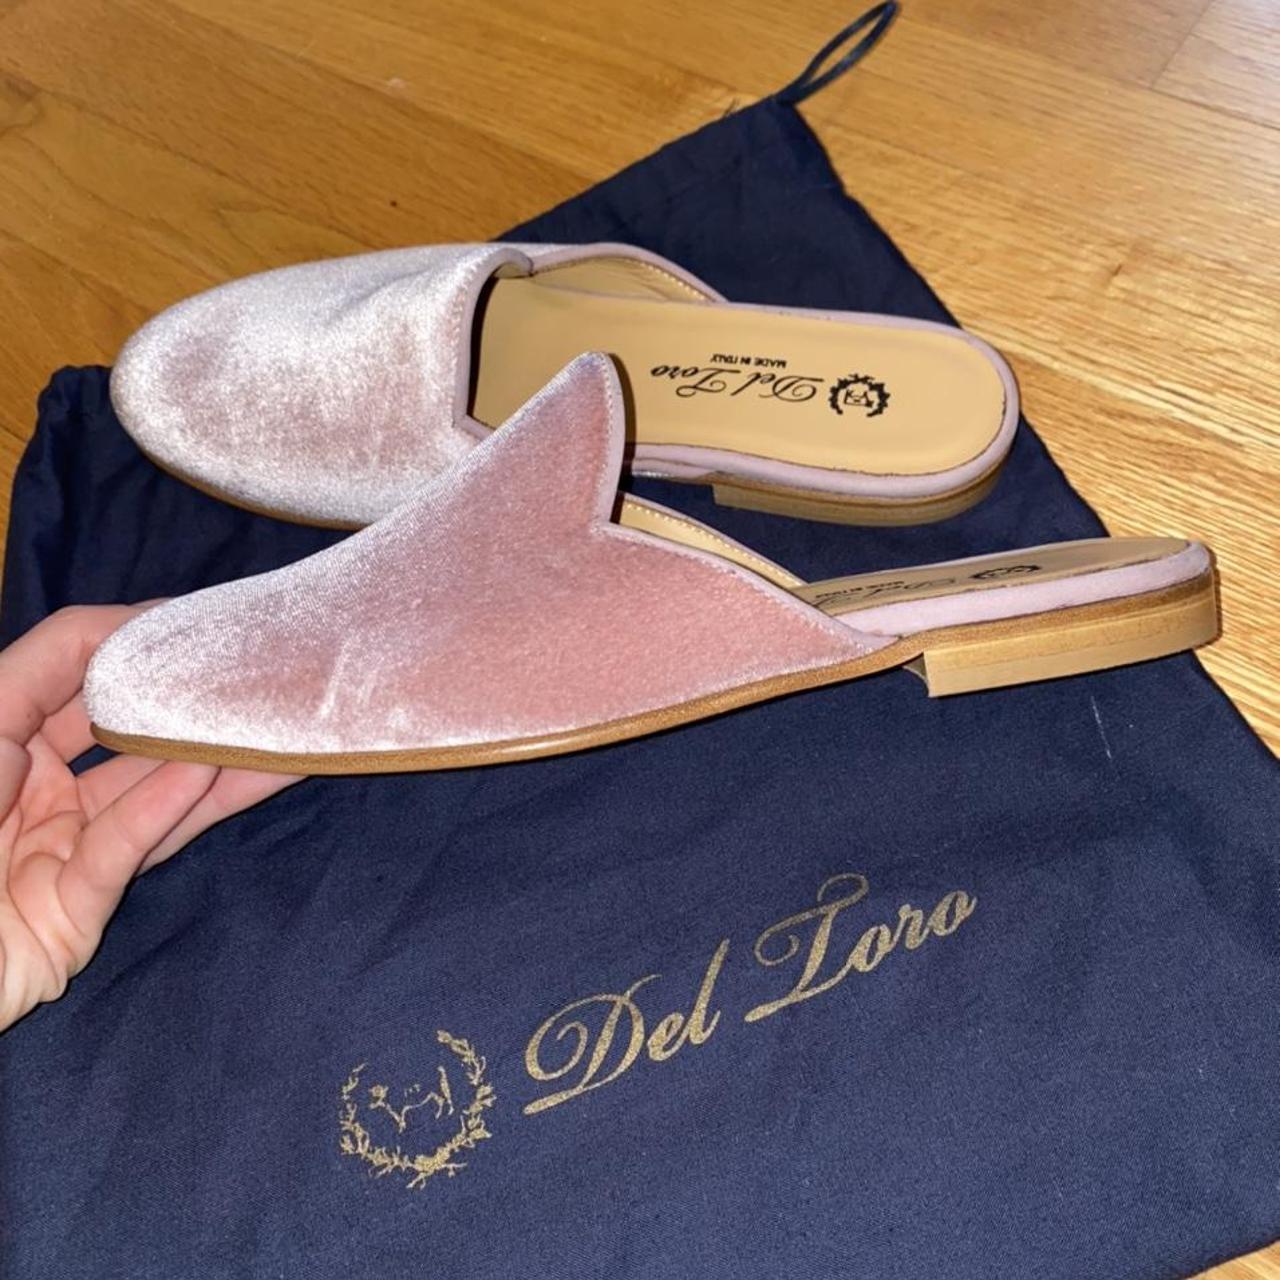 Product Image 2 - Del Toro pink house slippers.